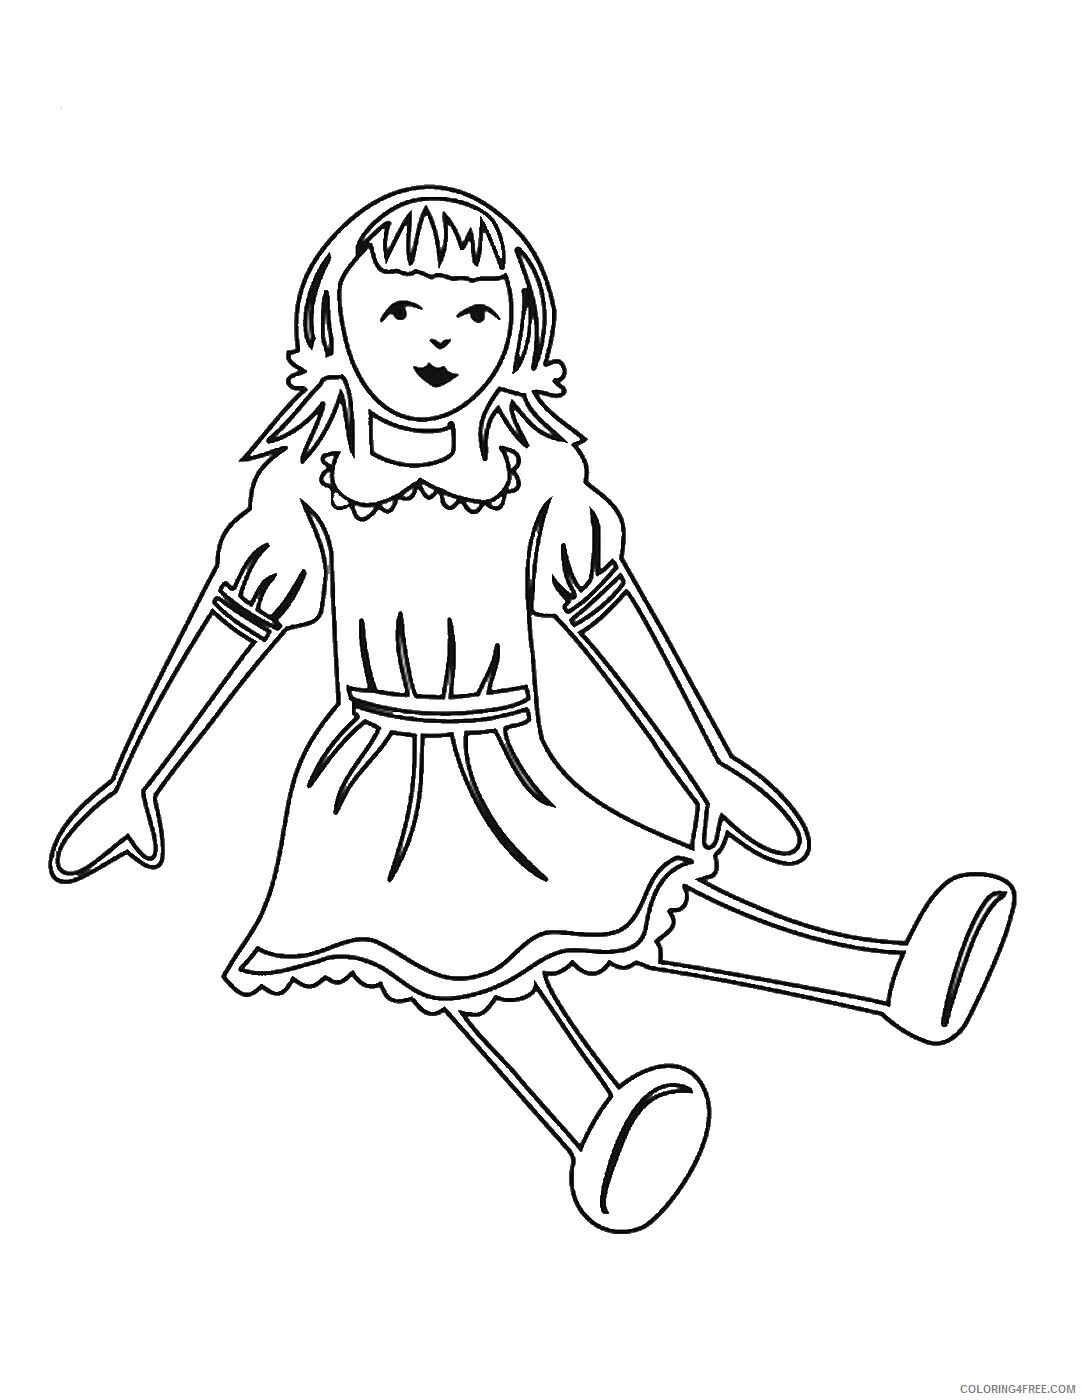 Doll Coloring Pages for Girls dolls_13 Printable 2021 0376 Coloring4free